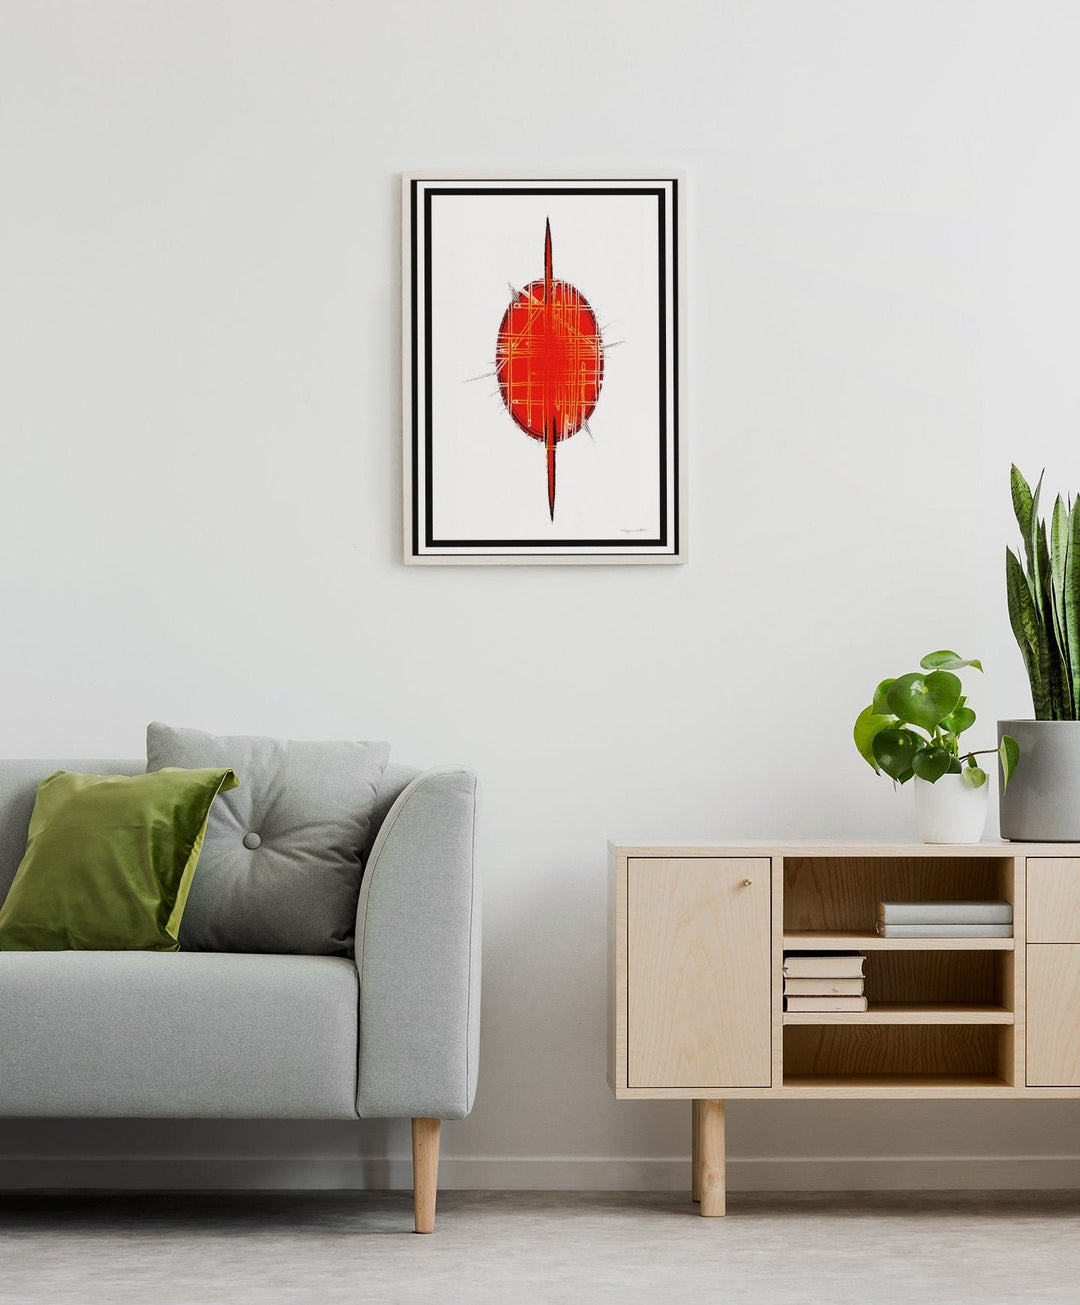 Abstract Wall Art - Nfear Red Eye at Miami Abstract Inc.